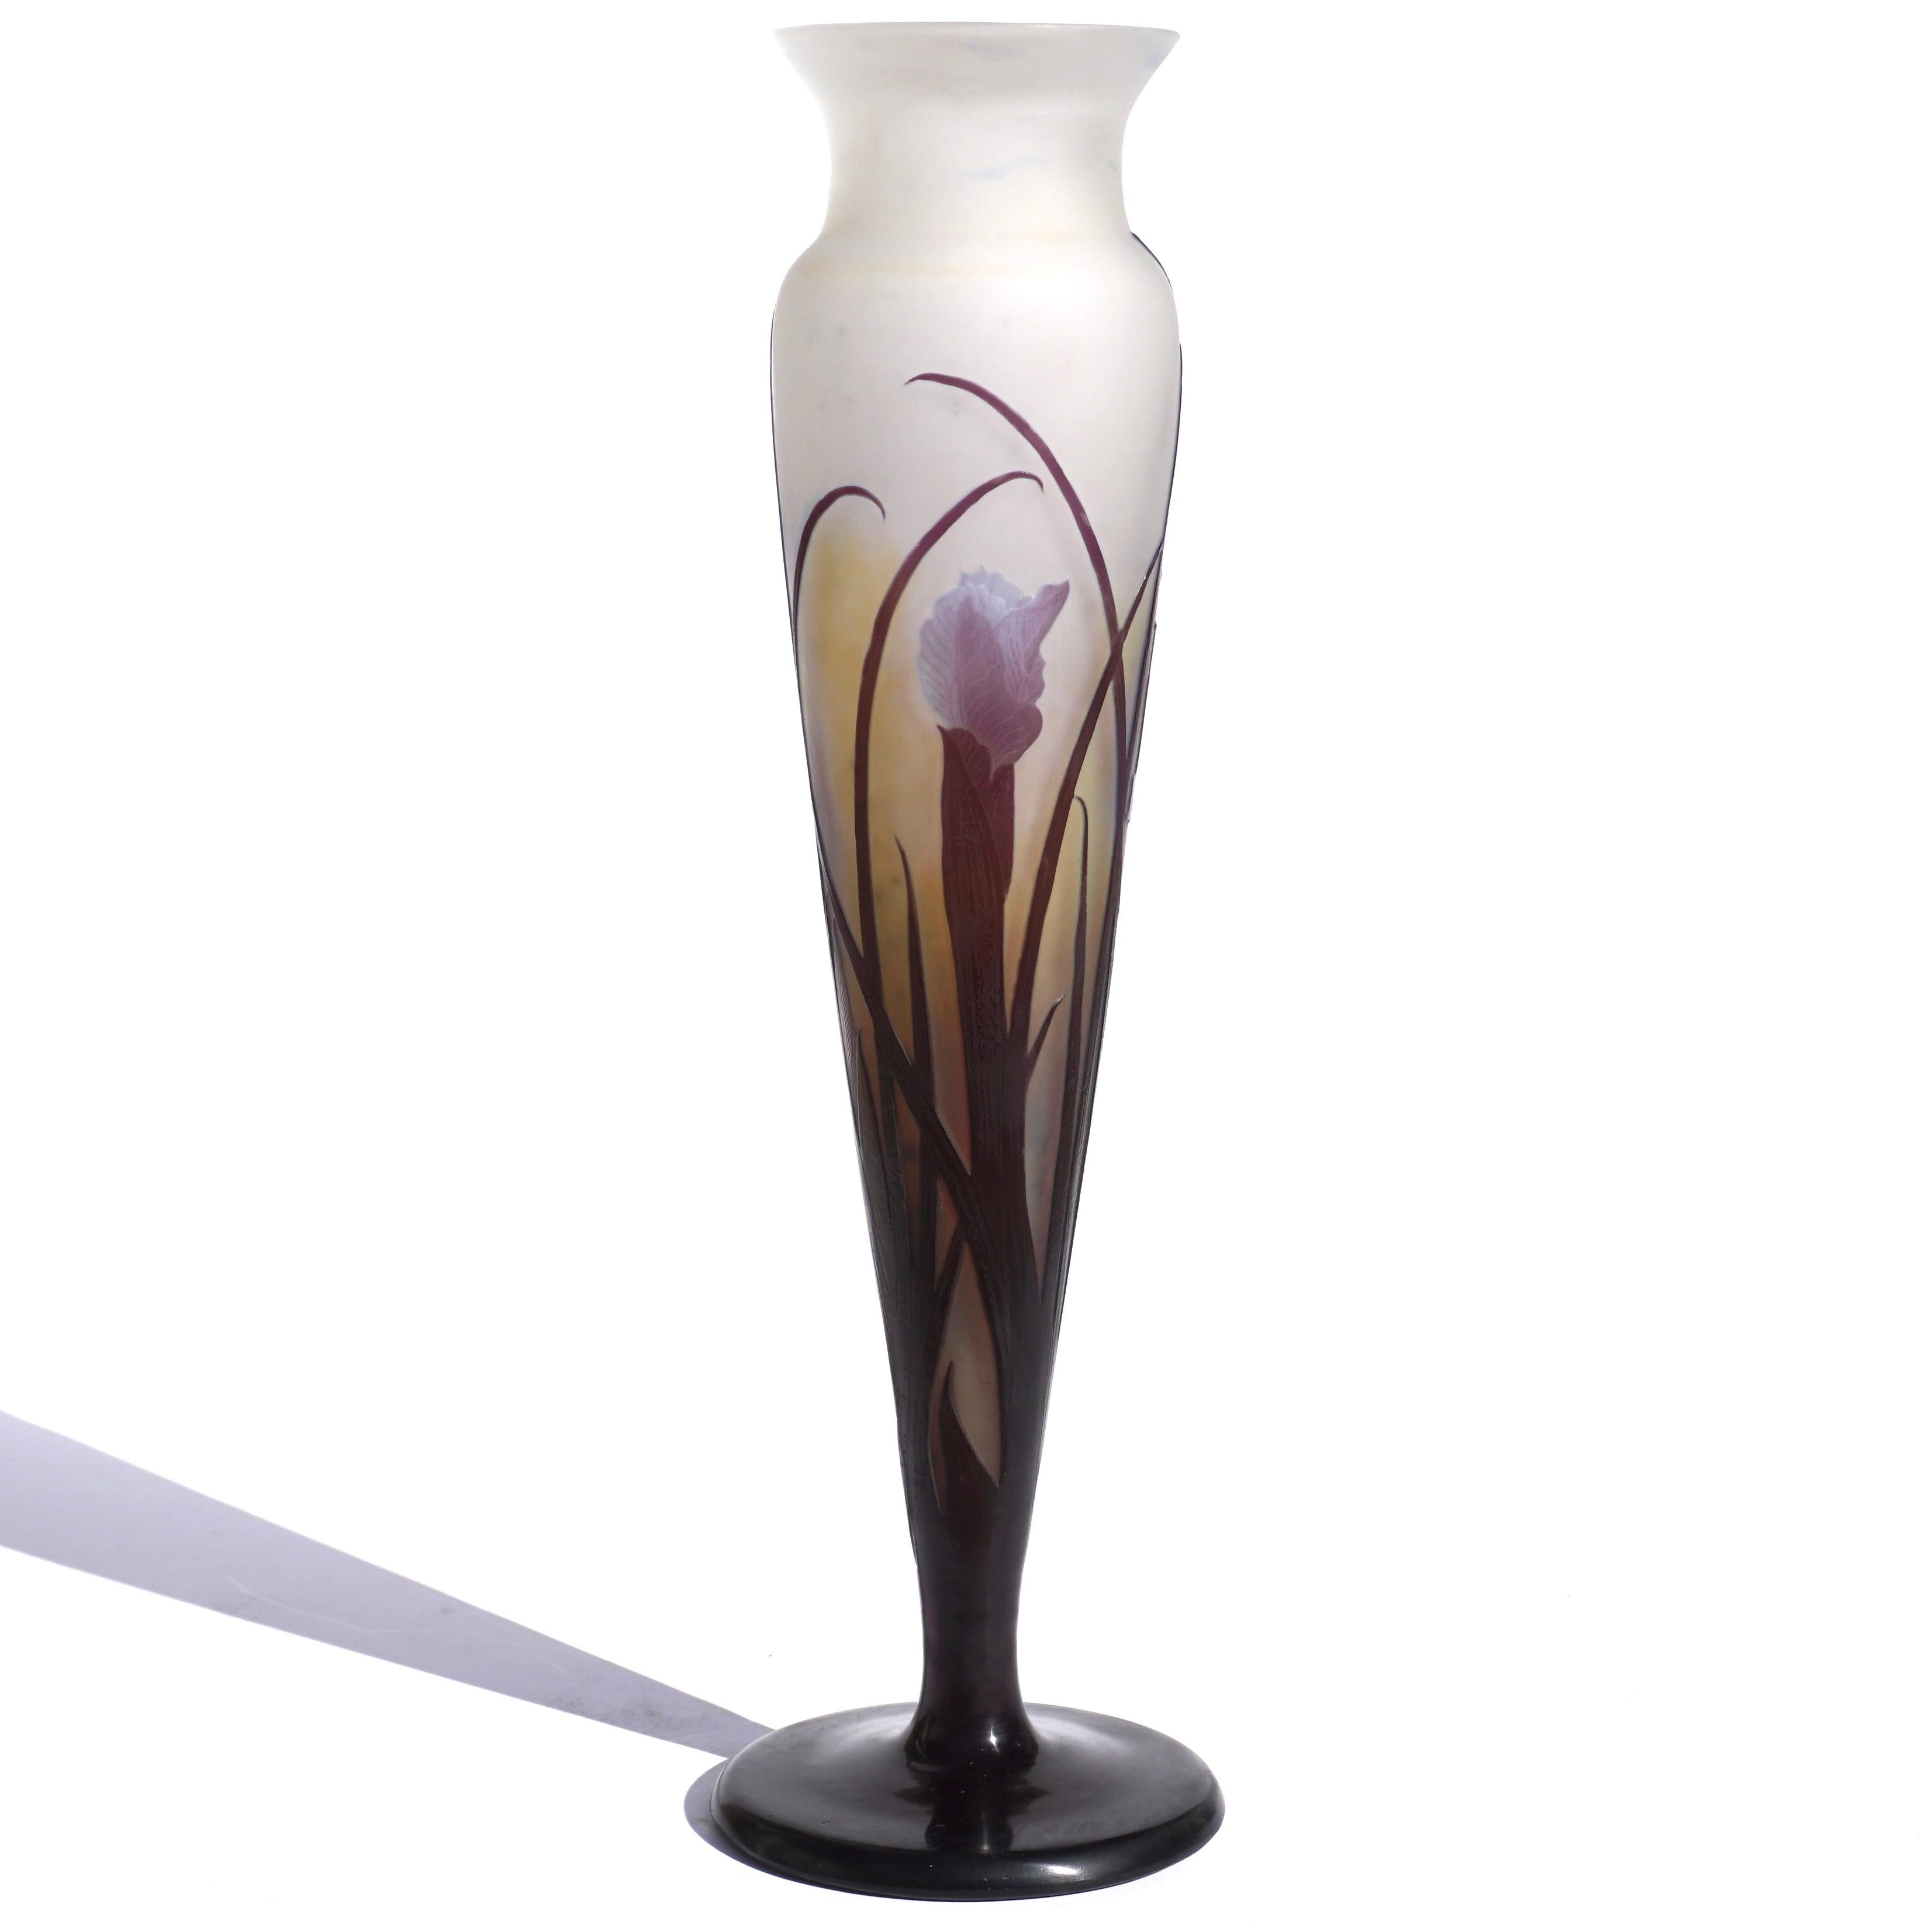 Emile Gallé 
Iris a double overlay cameo glass vase, circa 1900
overlaid and acid-etched with irises and their slender leaves, signed in cameo Gallé. The Iris pedals also create a window pane effect with light. This is definitely a collector’s